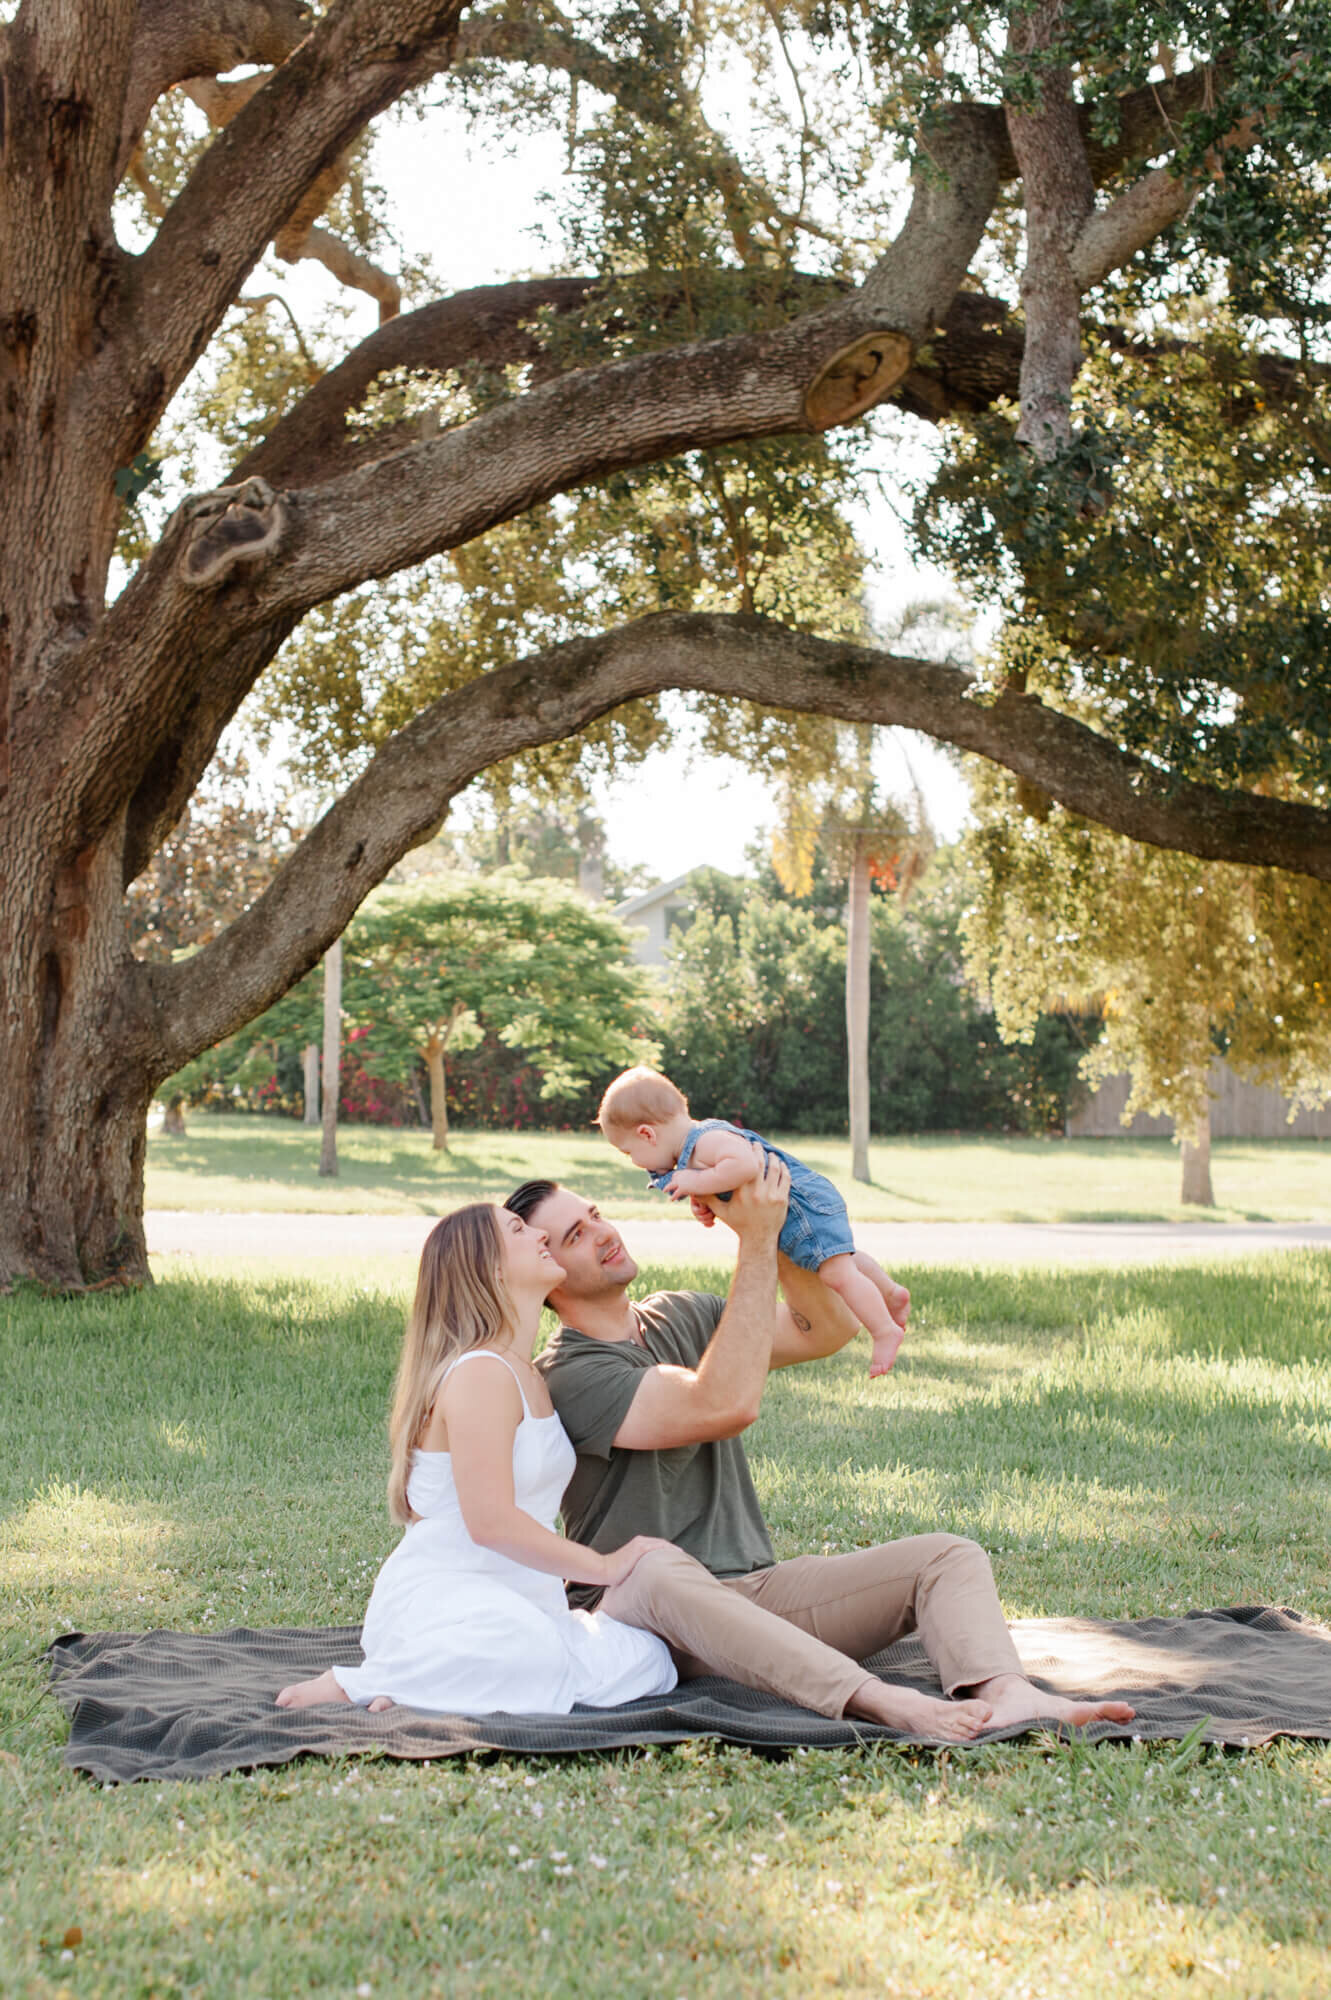 Melbourne Fl family sits underneath a beautiful oak tree holding up son and laughing at each other